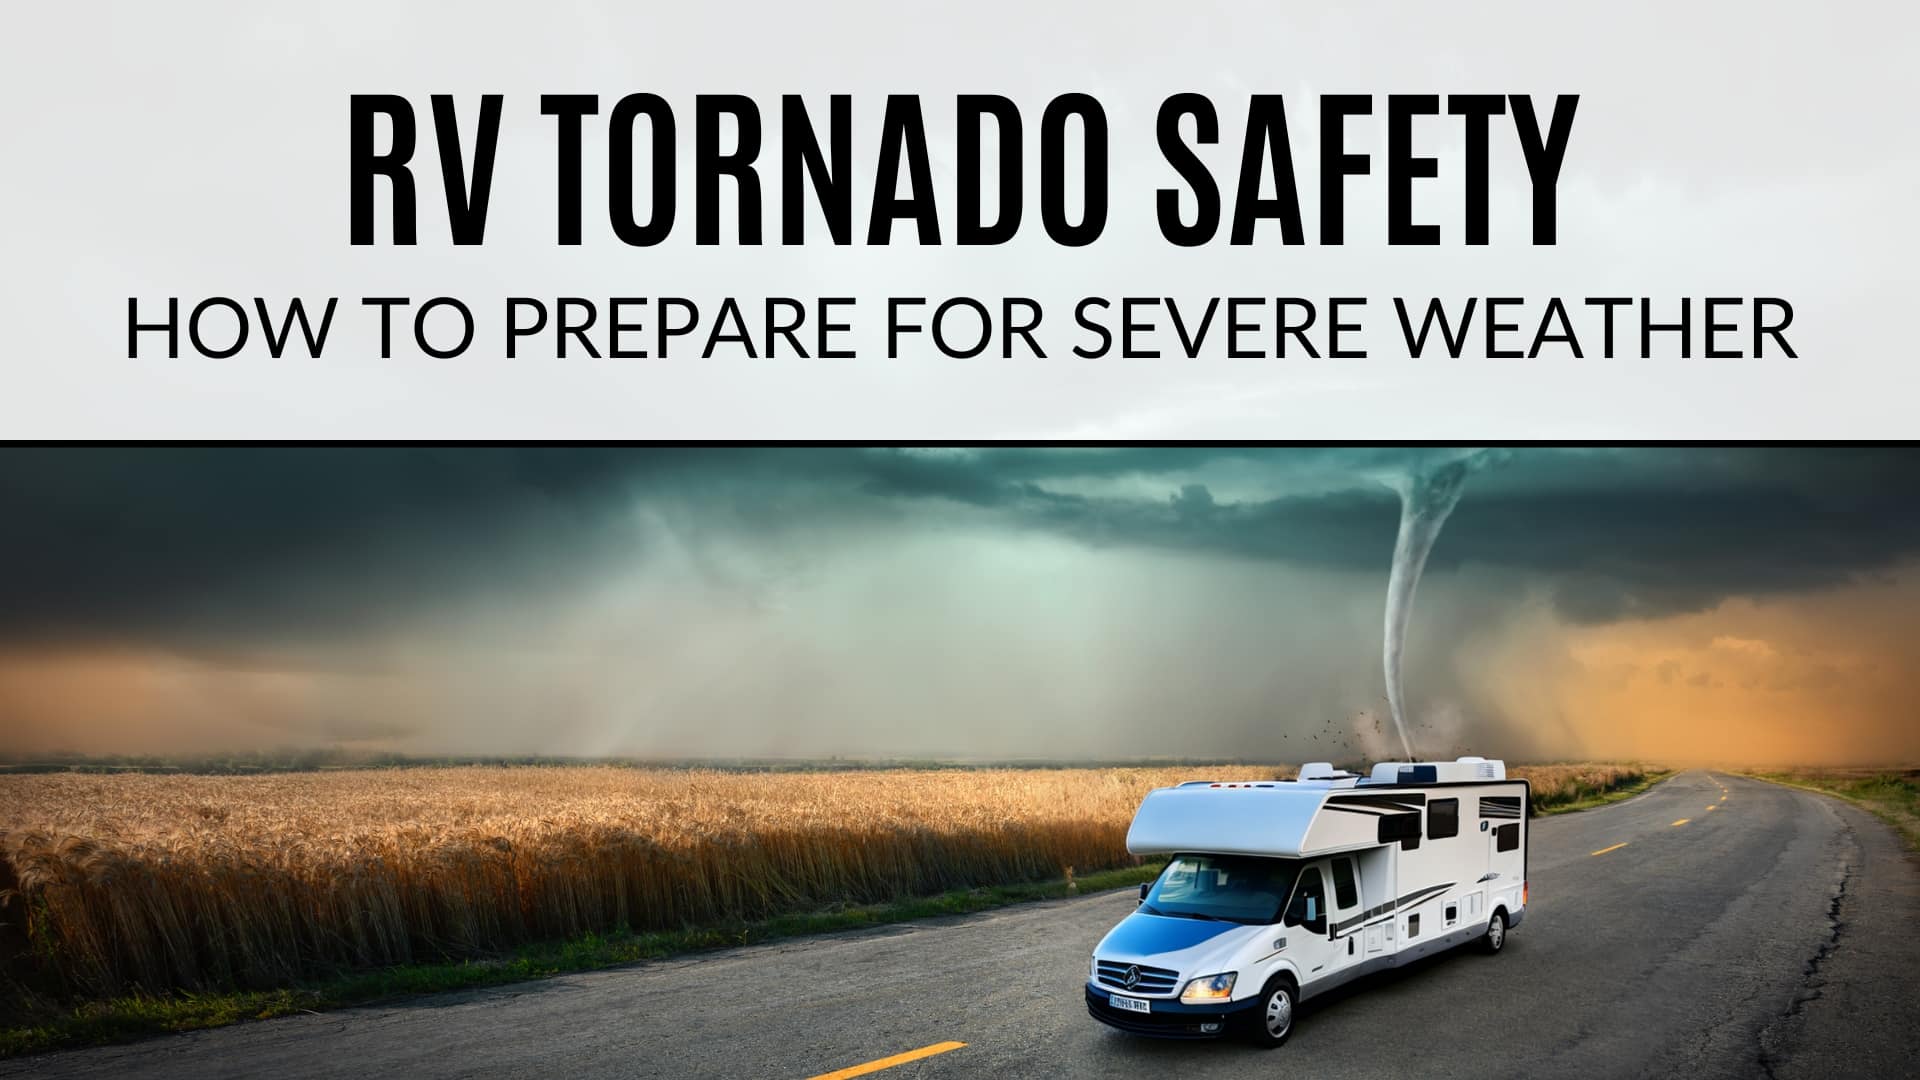 RV driving on the road with tornado in the background. Text says "RV Tornado Safety. How to Prepare for Sever Weather"